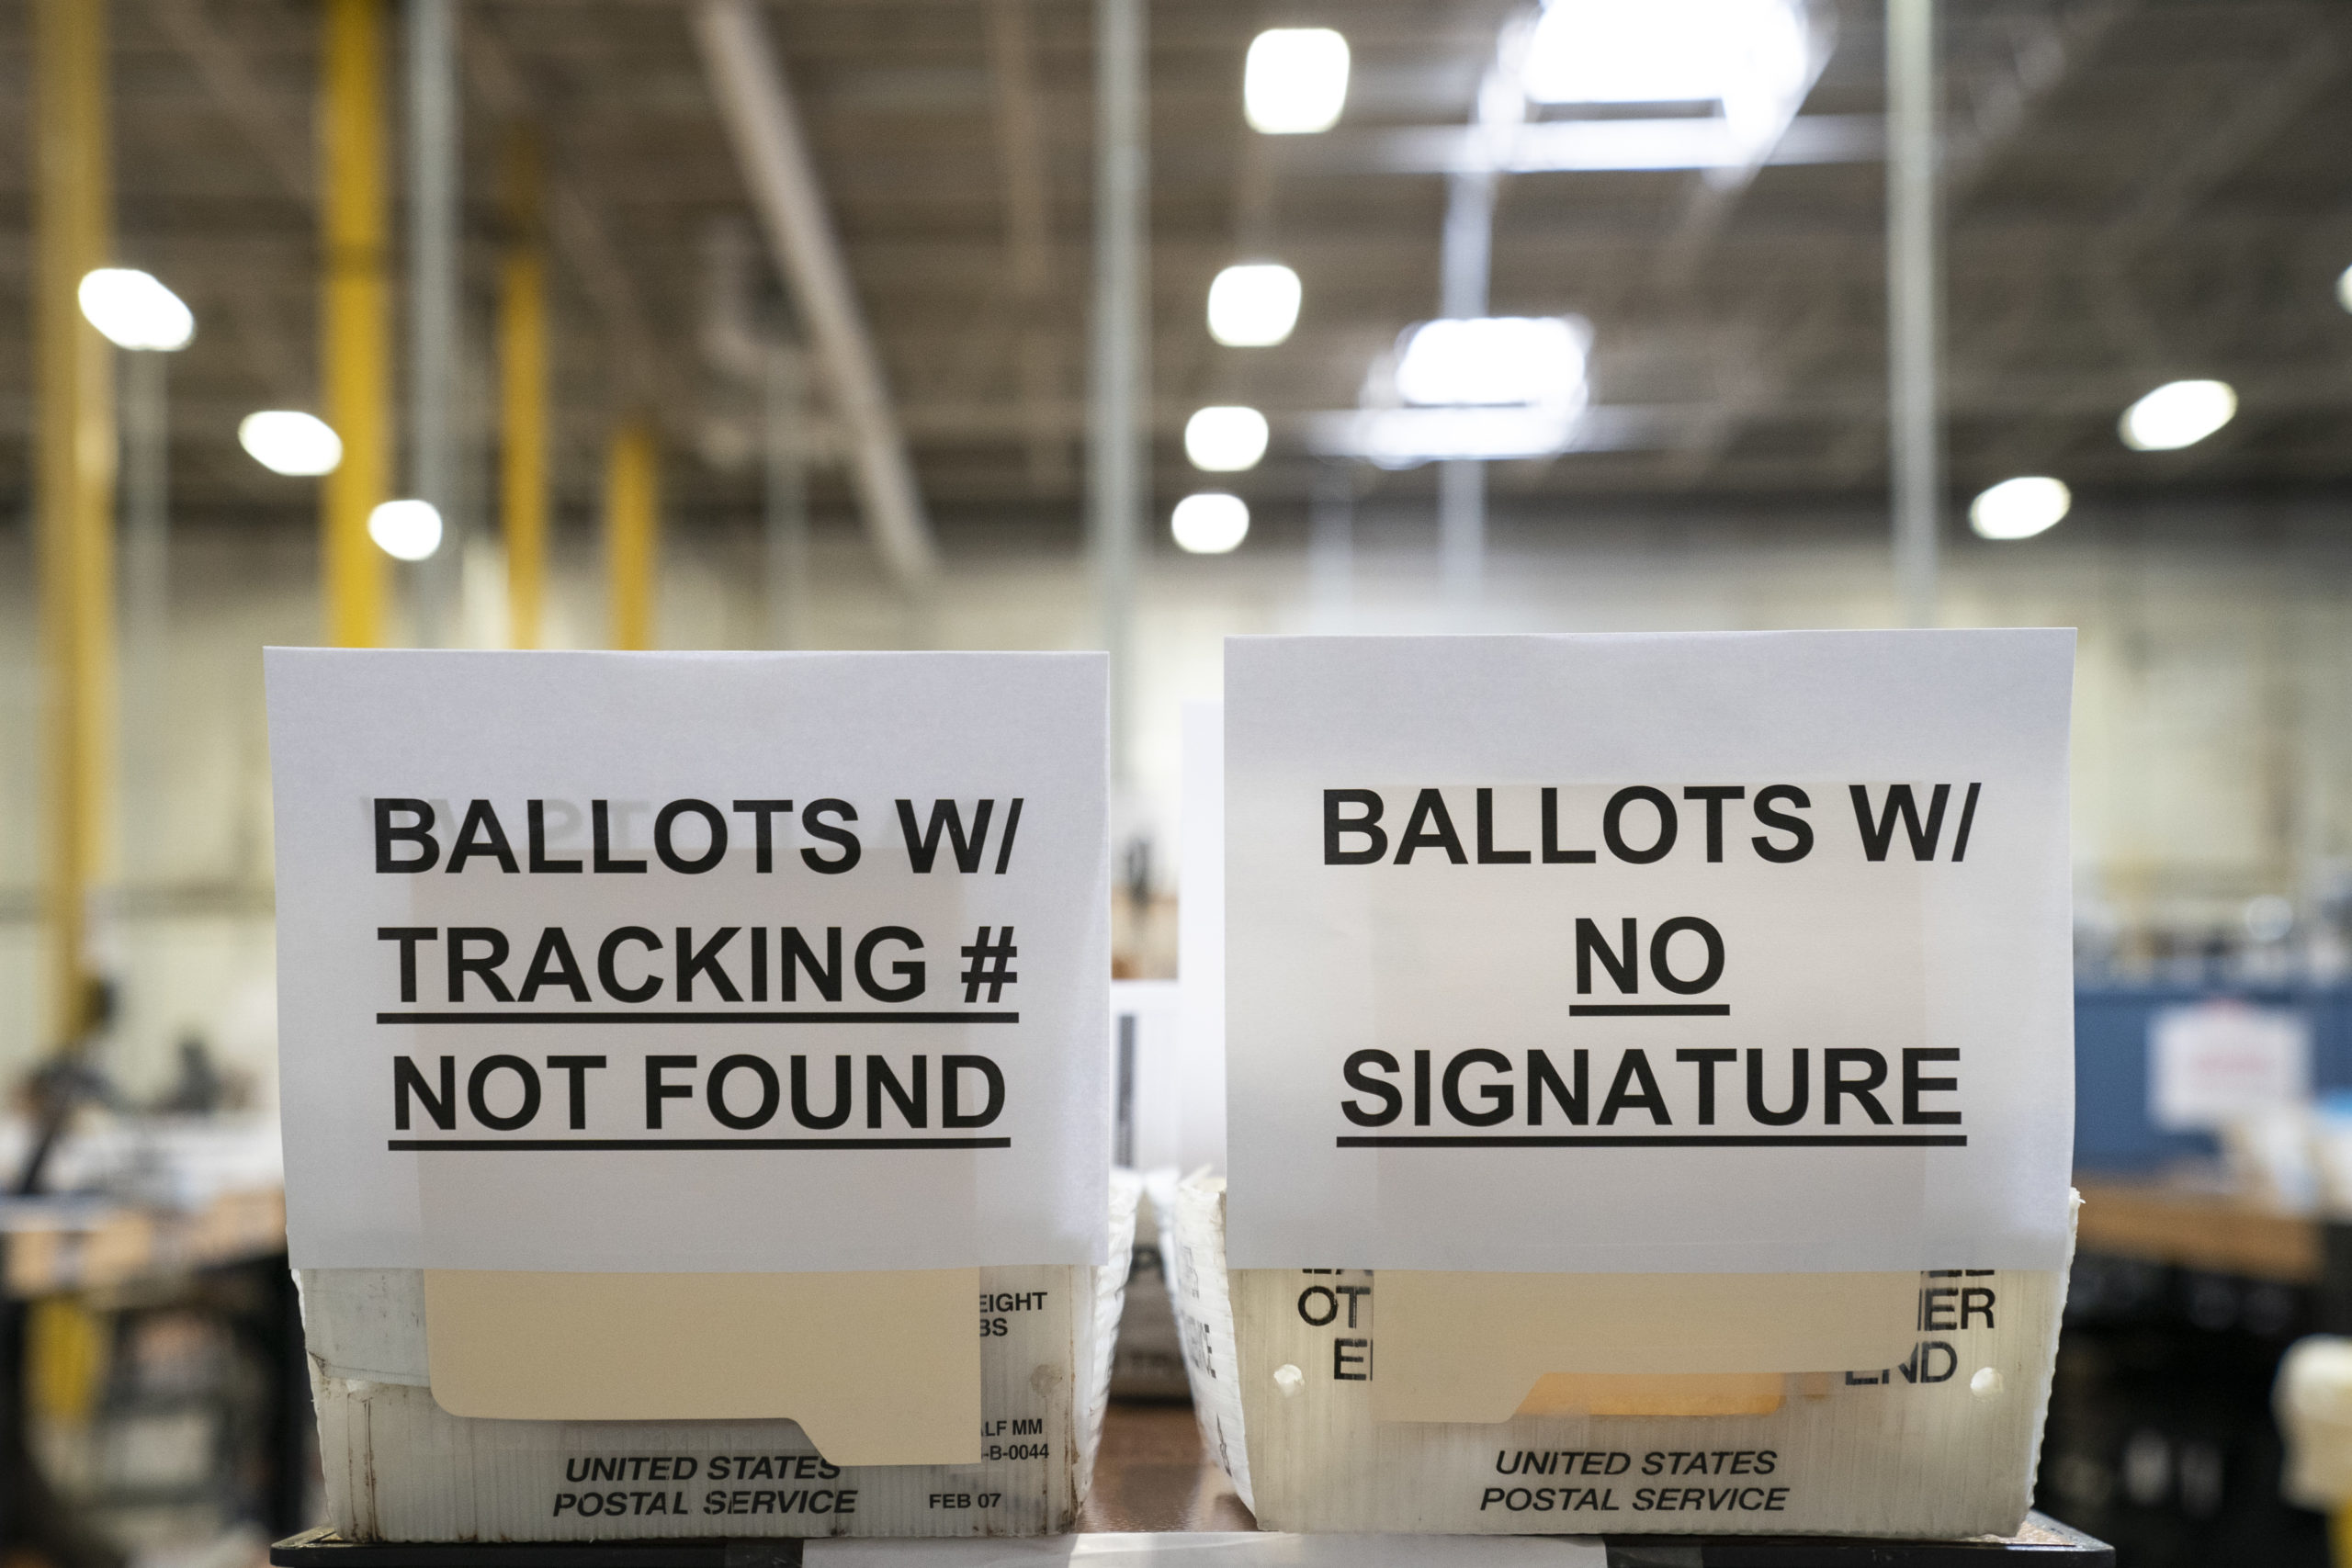 GLEN BURNIE, MD - OCTOBER 07: Signage for ballots with errors is seen in a warehouse at the Anne Arundel County Board of Elections headquarters on October 7, 2020 in Glen Burnie, Maryland. (Photo by Drew Angerer/Getty Images)